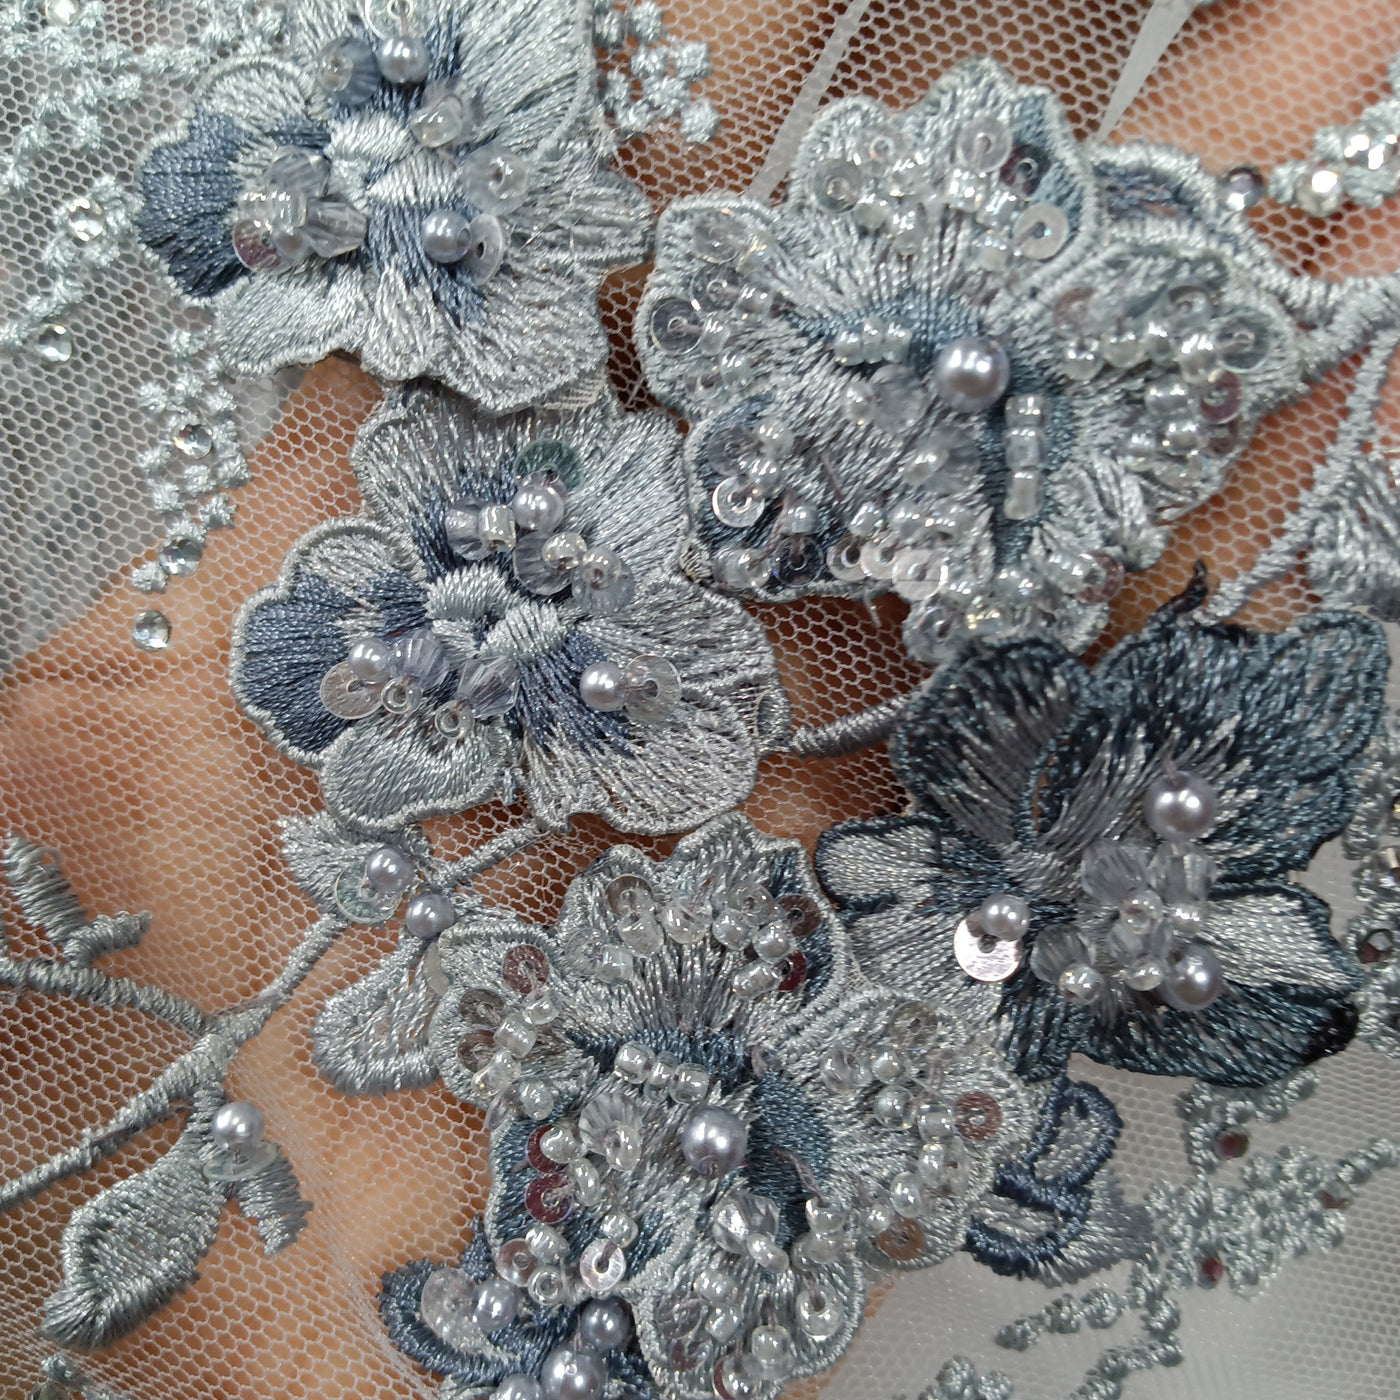 3D Floral Multitone Embroidered Net Fabric with Beads & Rhinestones. Lace Usa